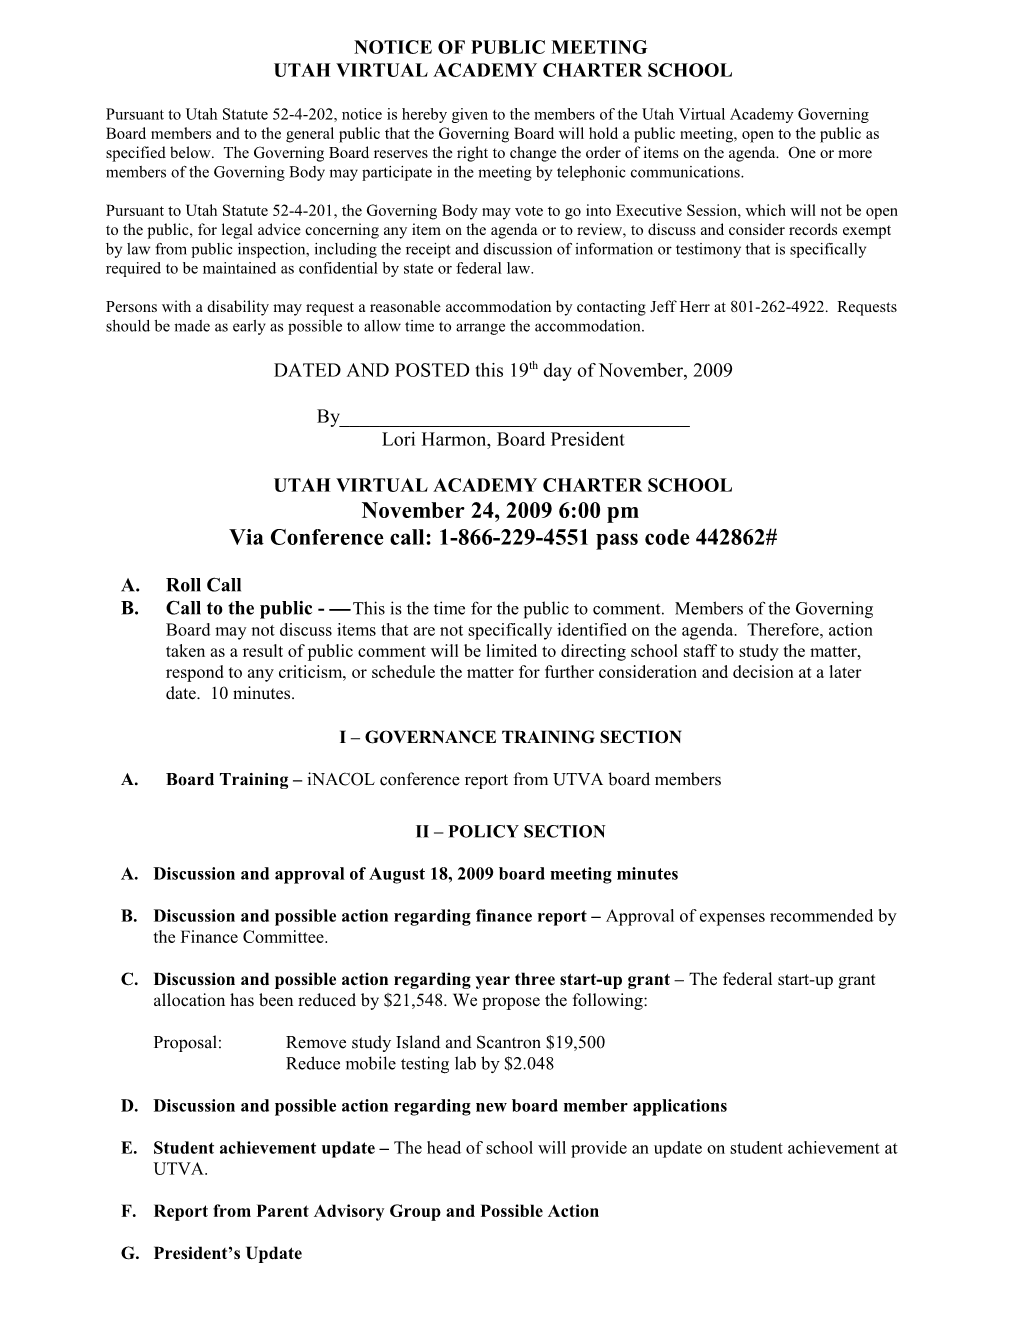 Charter School Corrective Action Plan Submission Action Item